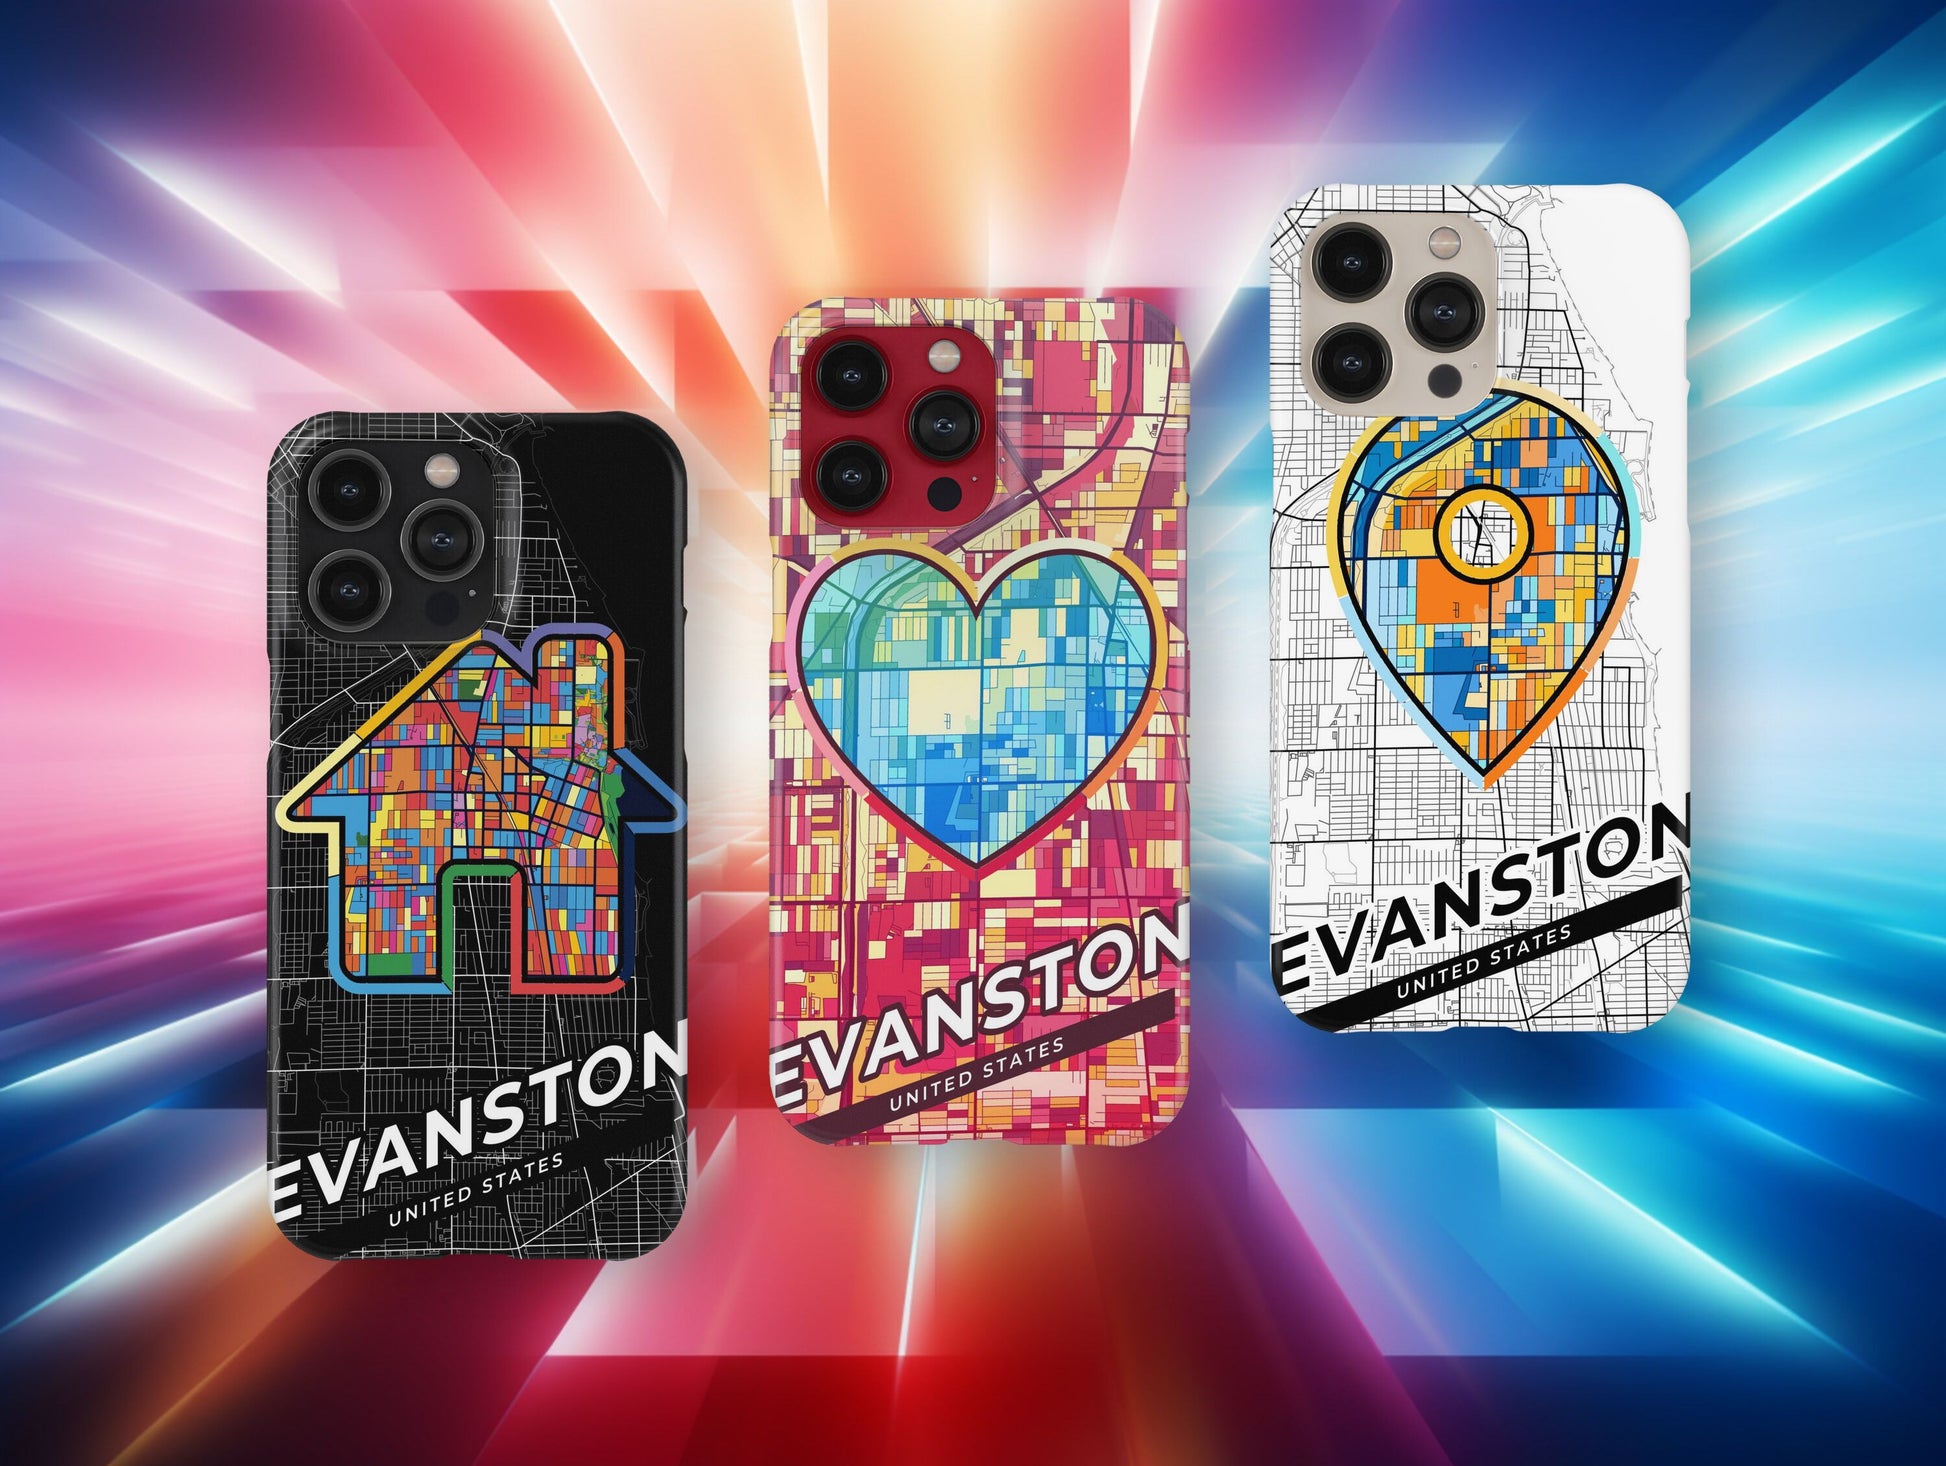 Evanston Illinois slim phone case with colorful icon. Birthday, wedding or housewarming gift. Couple match cases.